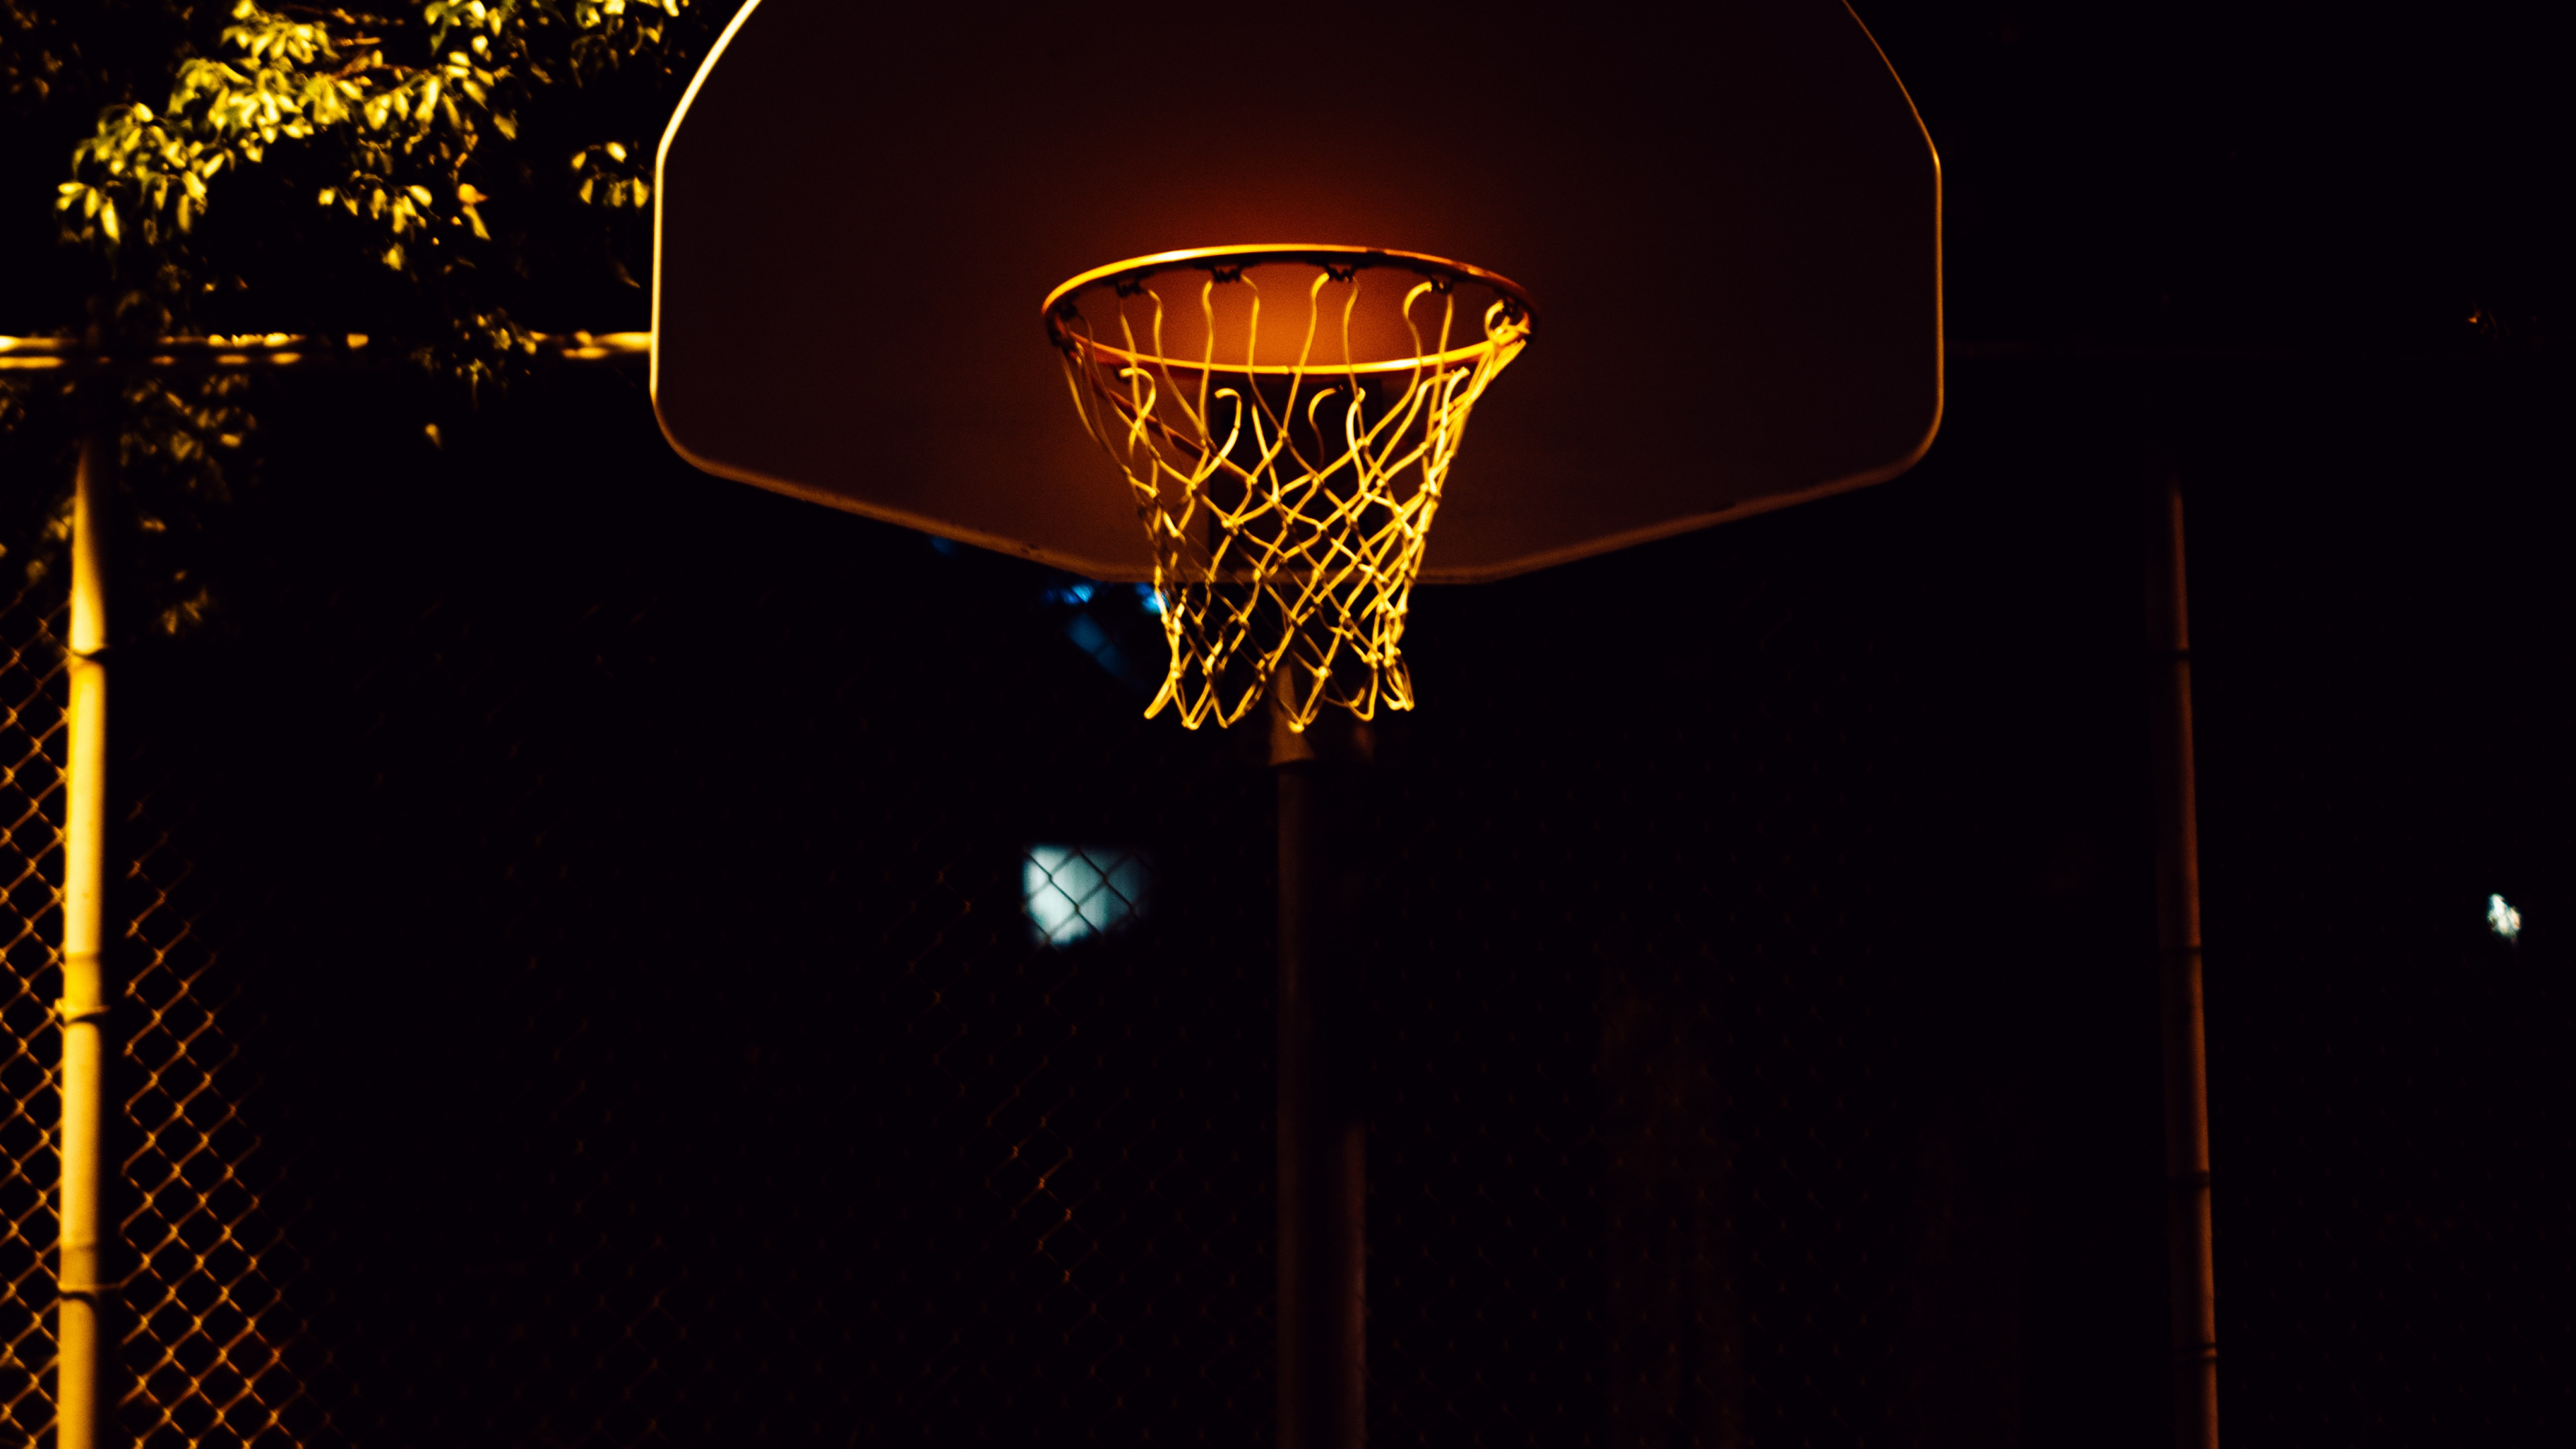 Basketball Hoop With Light Turned on During Night Time. Wallpaper in 3840x2160 Resolution